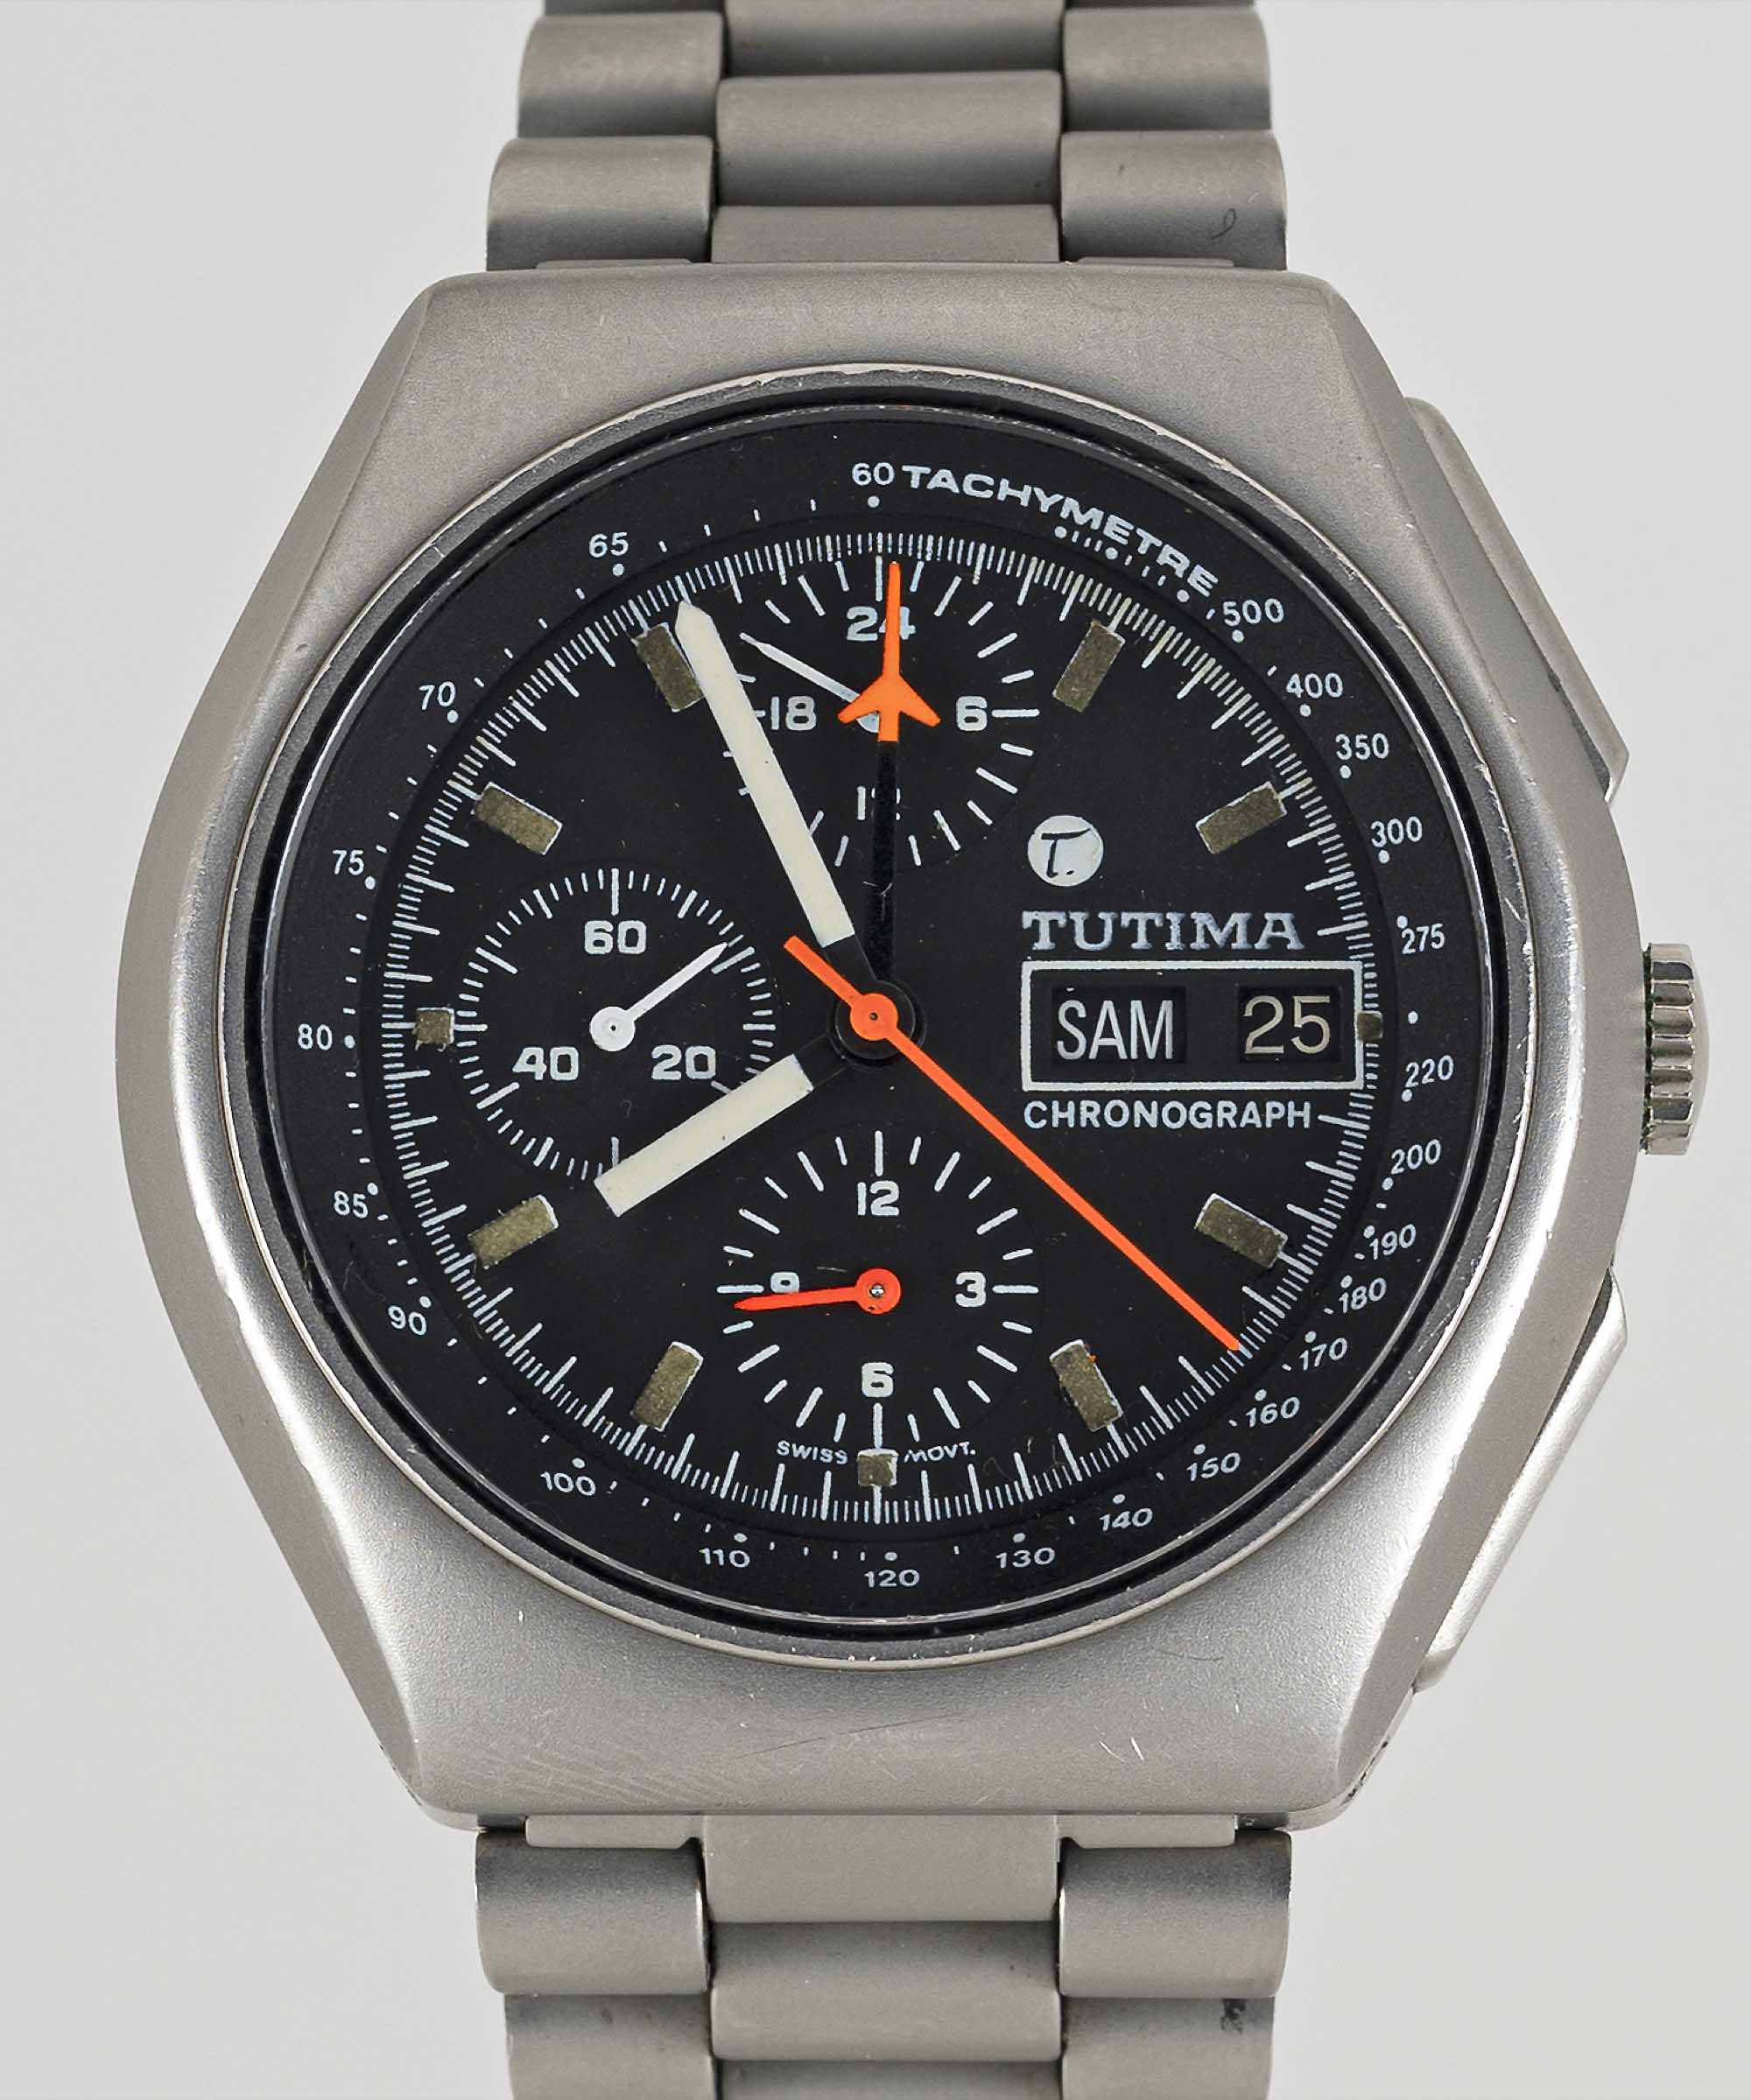 A GENTLEMAN'S STAINLESS STEEL MILITARY TUTIMA AUTOMATIC CHRONOGRAPH BRACELET WATCH CIRCA 1980s